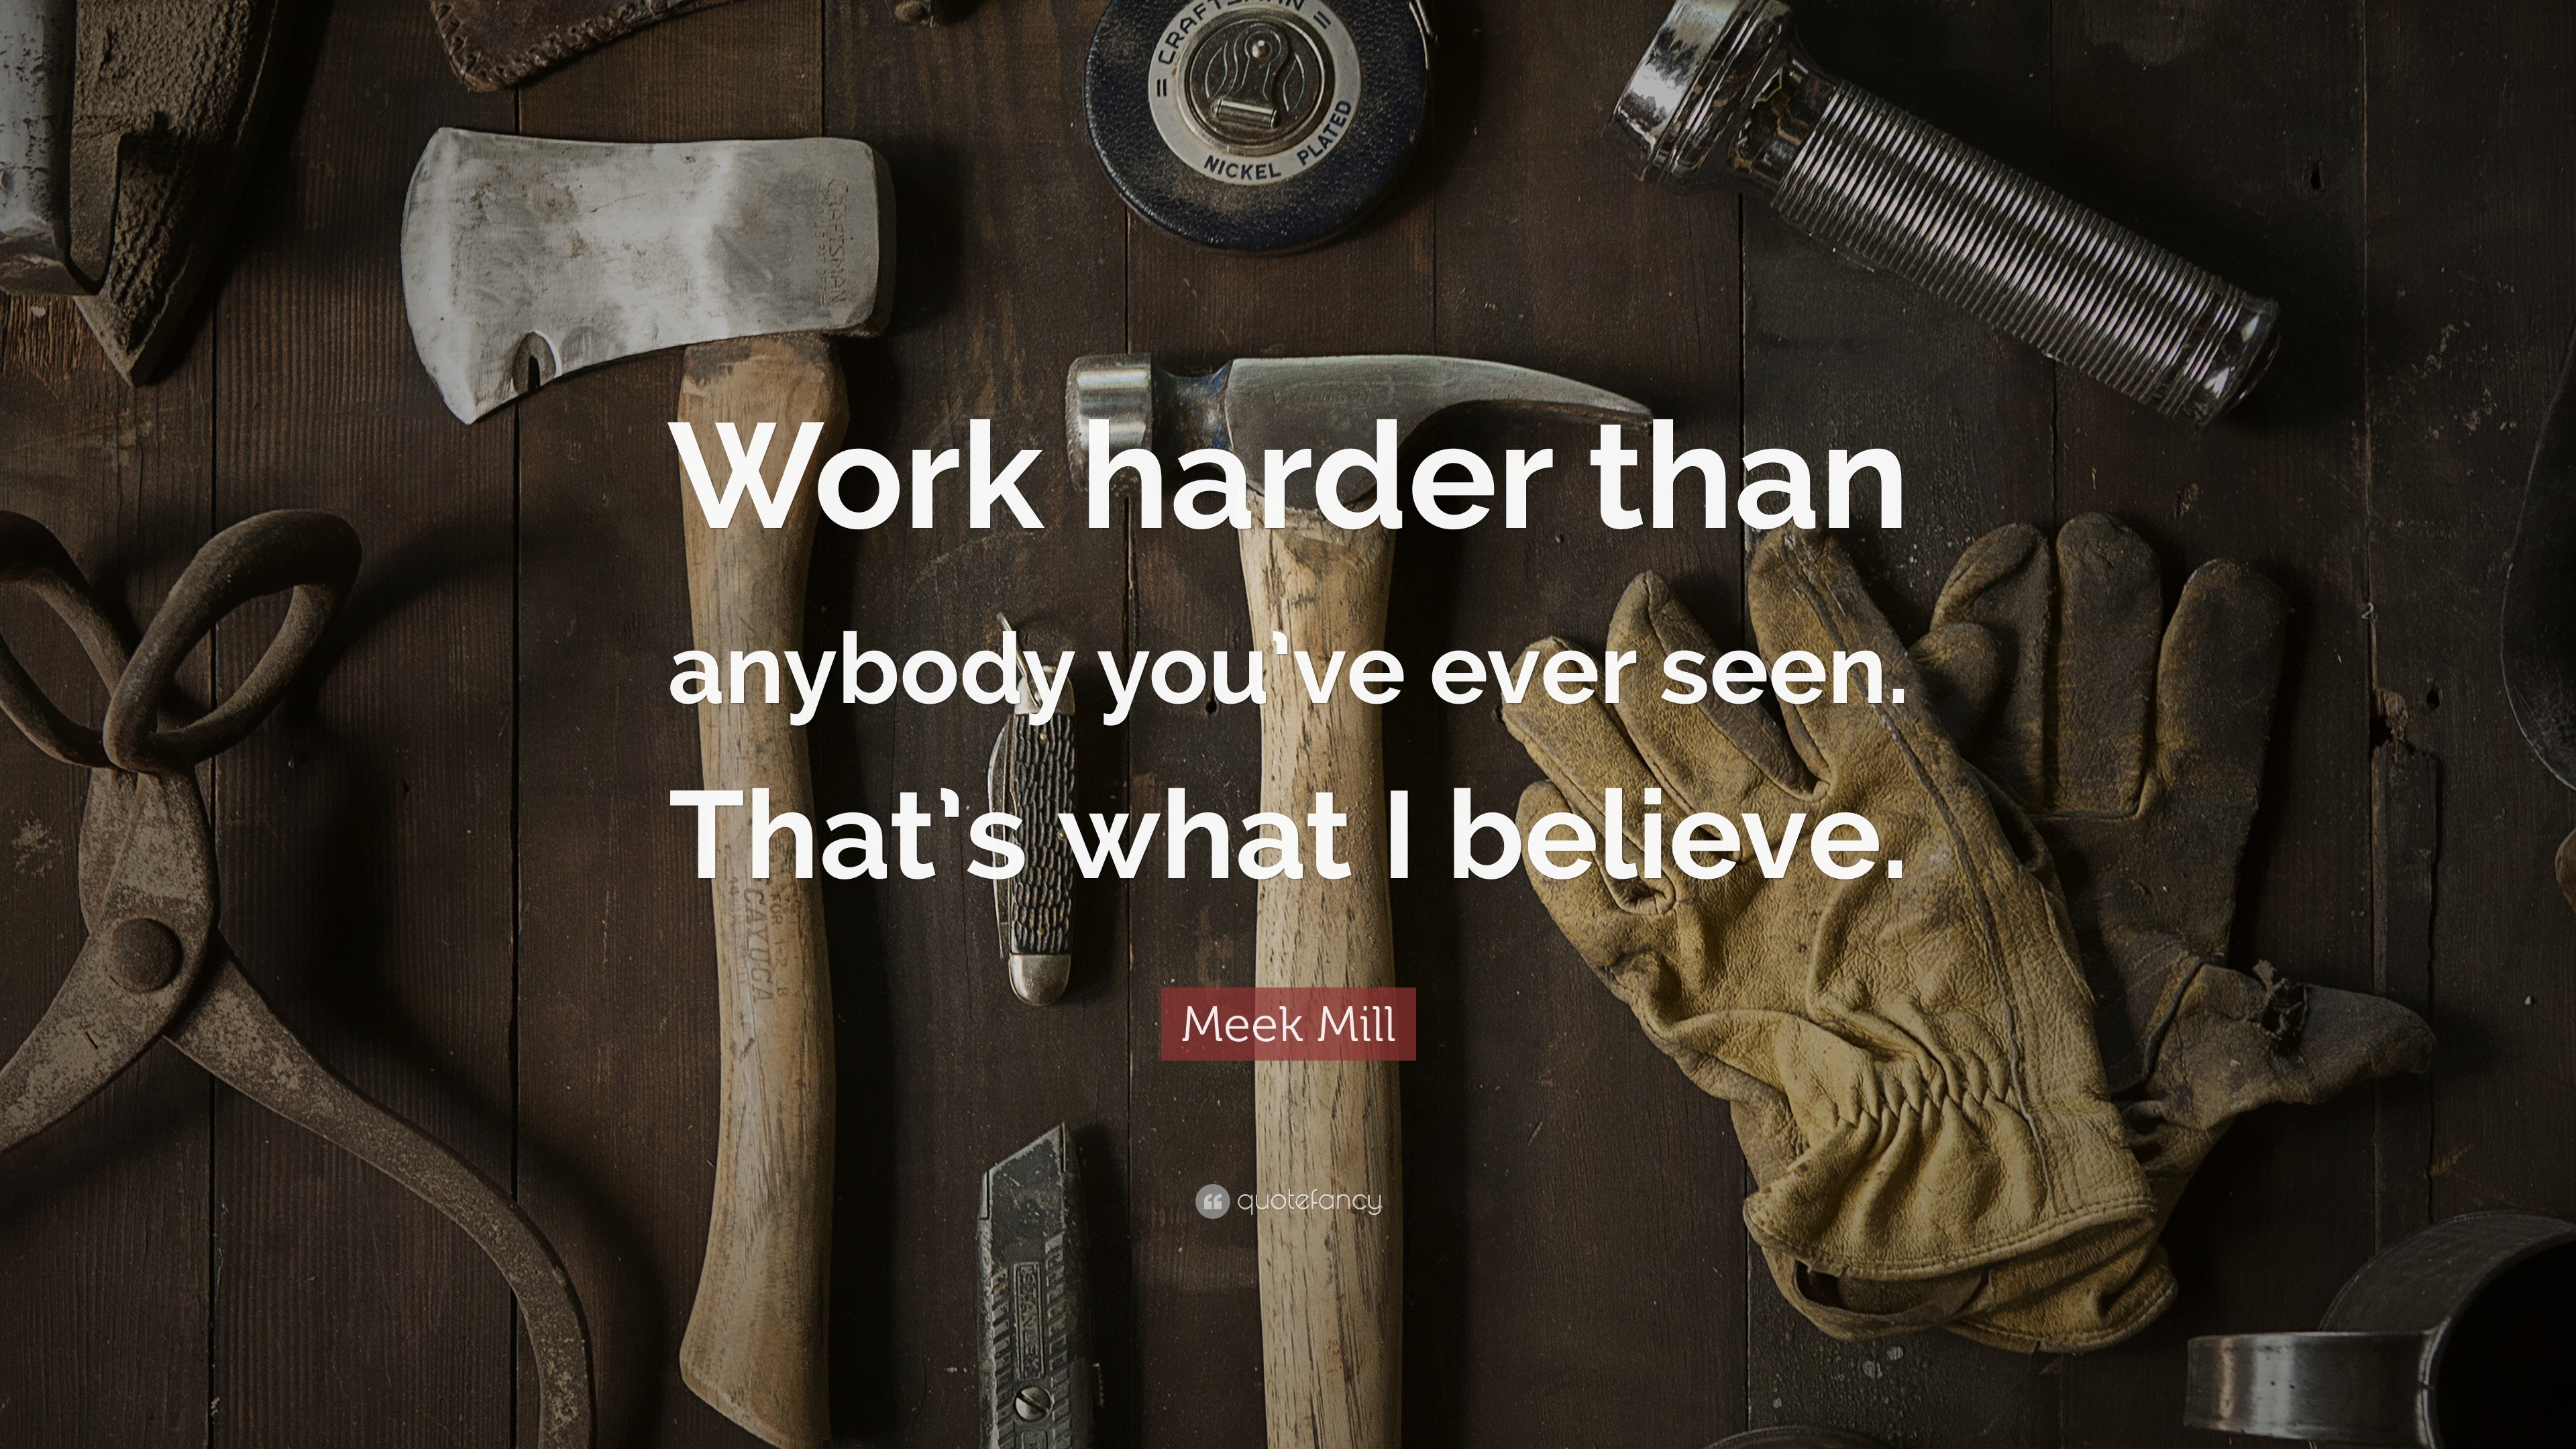 3840x2160 Meek Mill Quote: “Work harder than anybody you've ever seen. That's